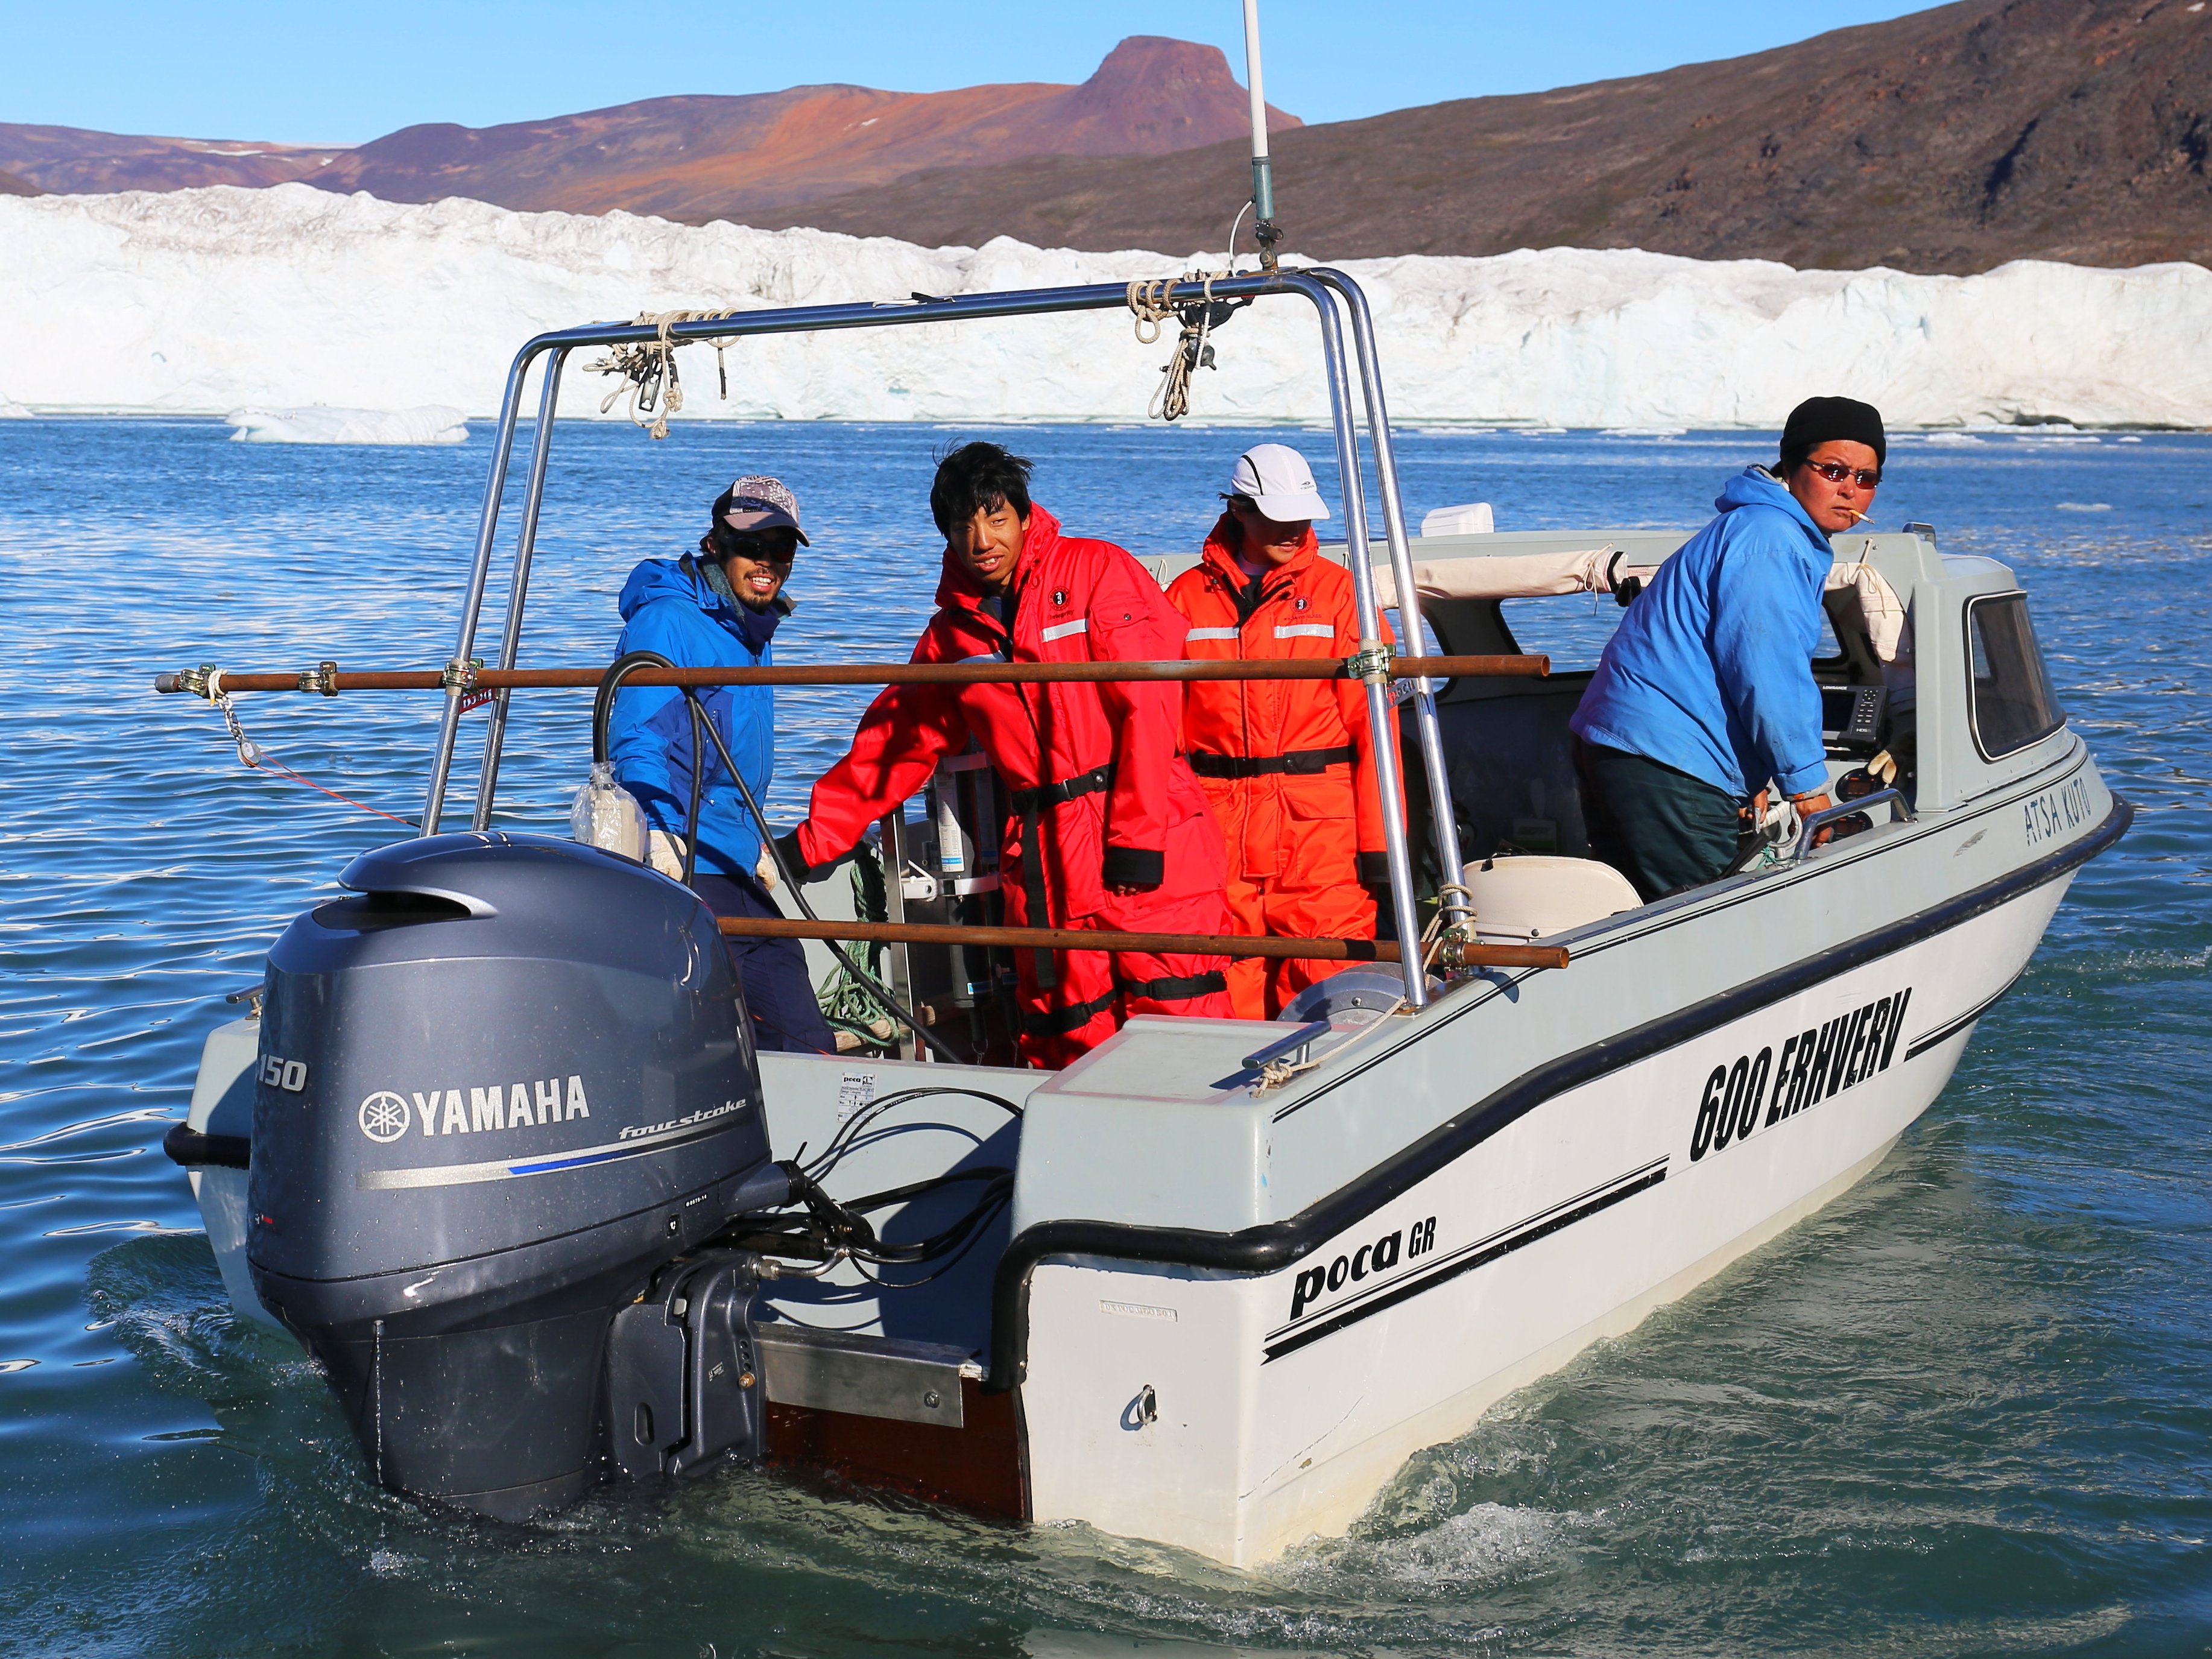 Conducting marine observation in a glacial fjord in collaboration with local residents